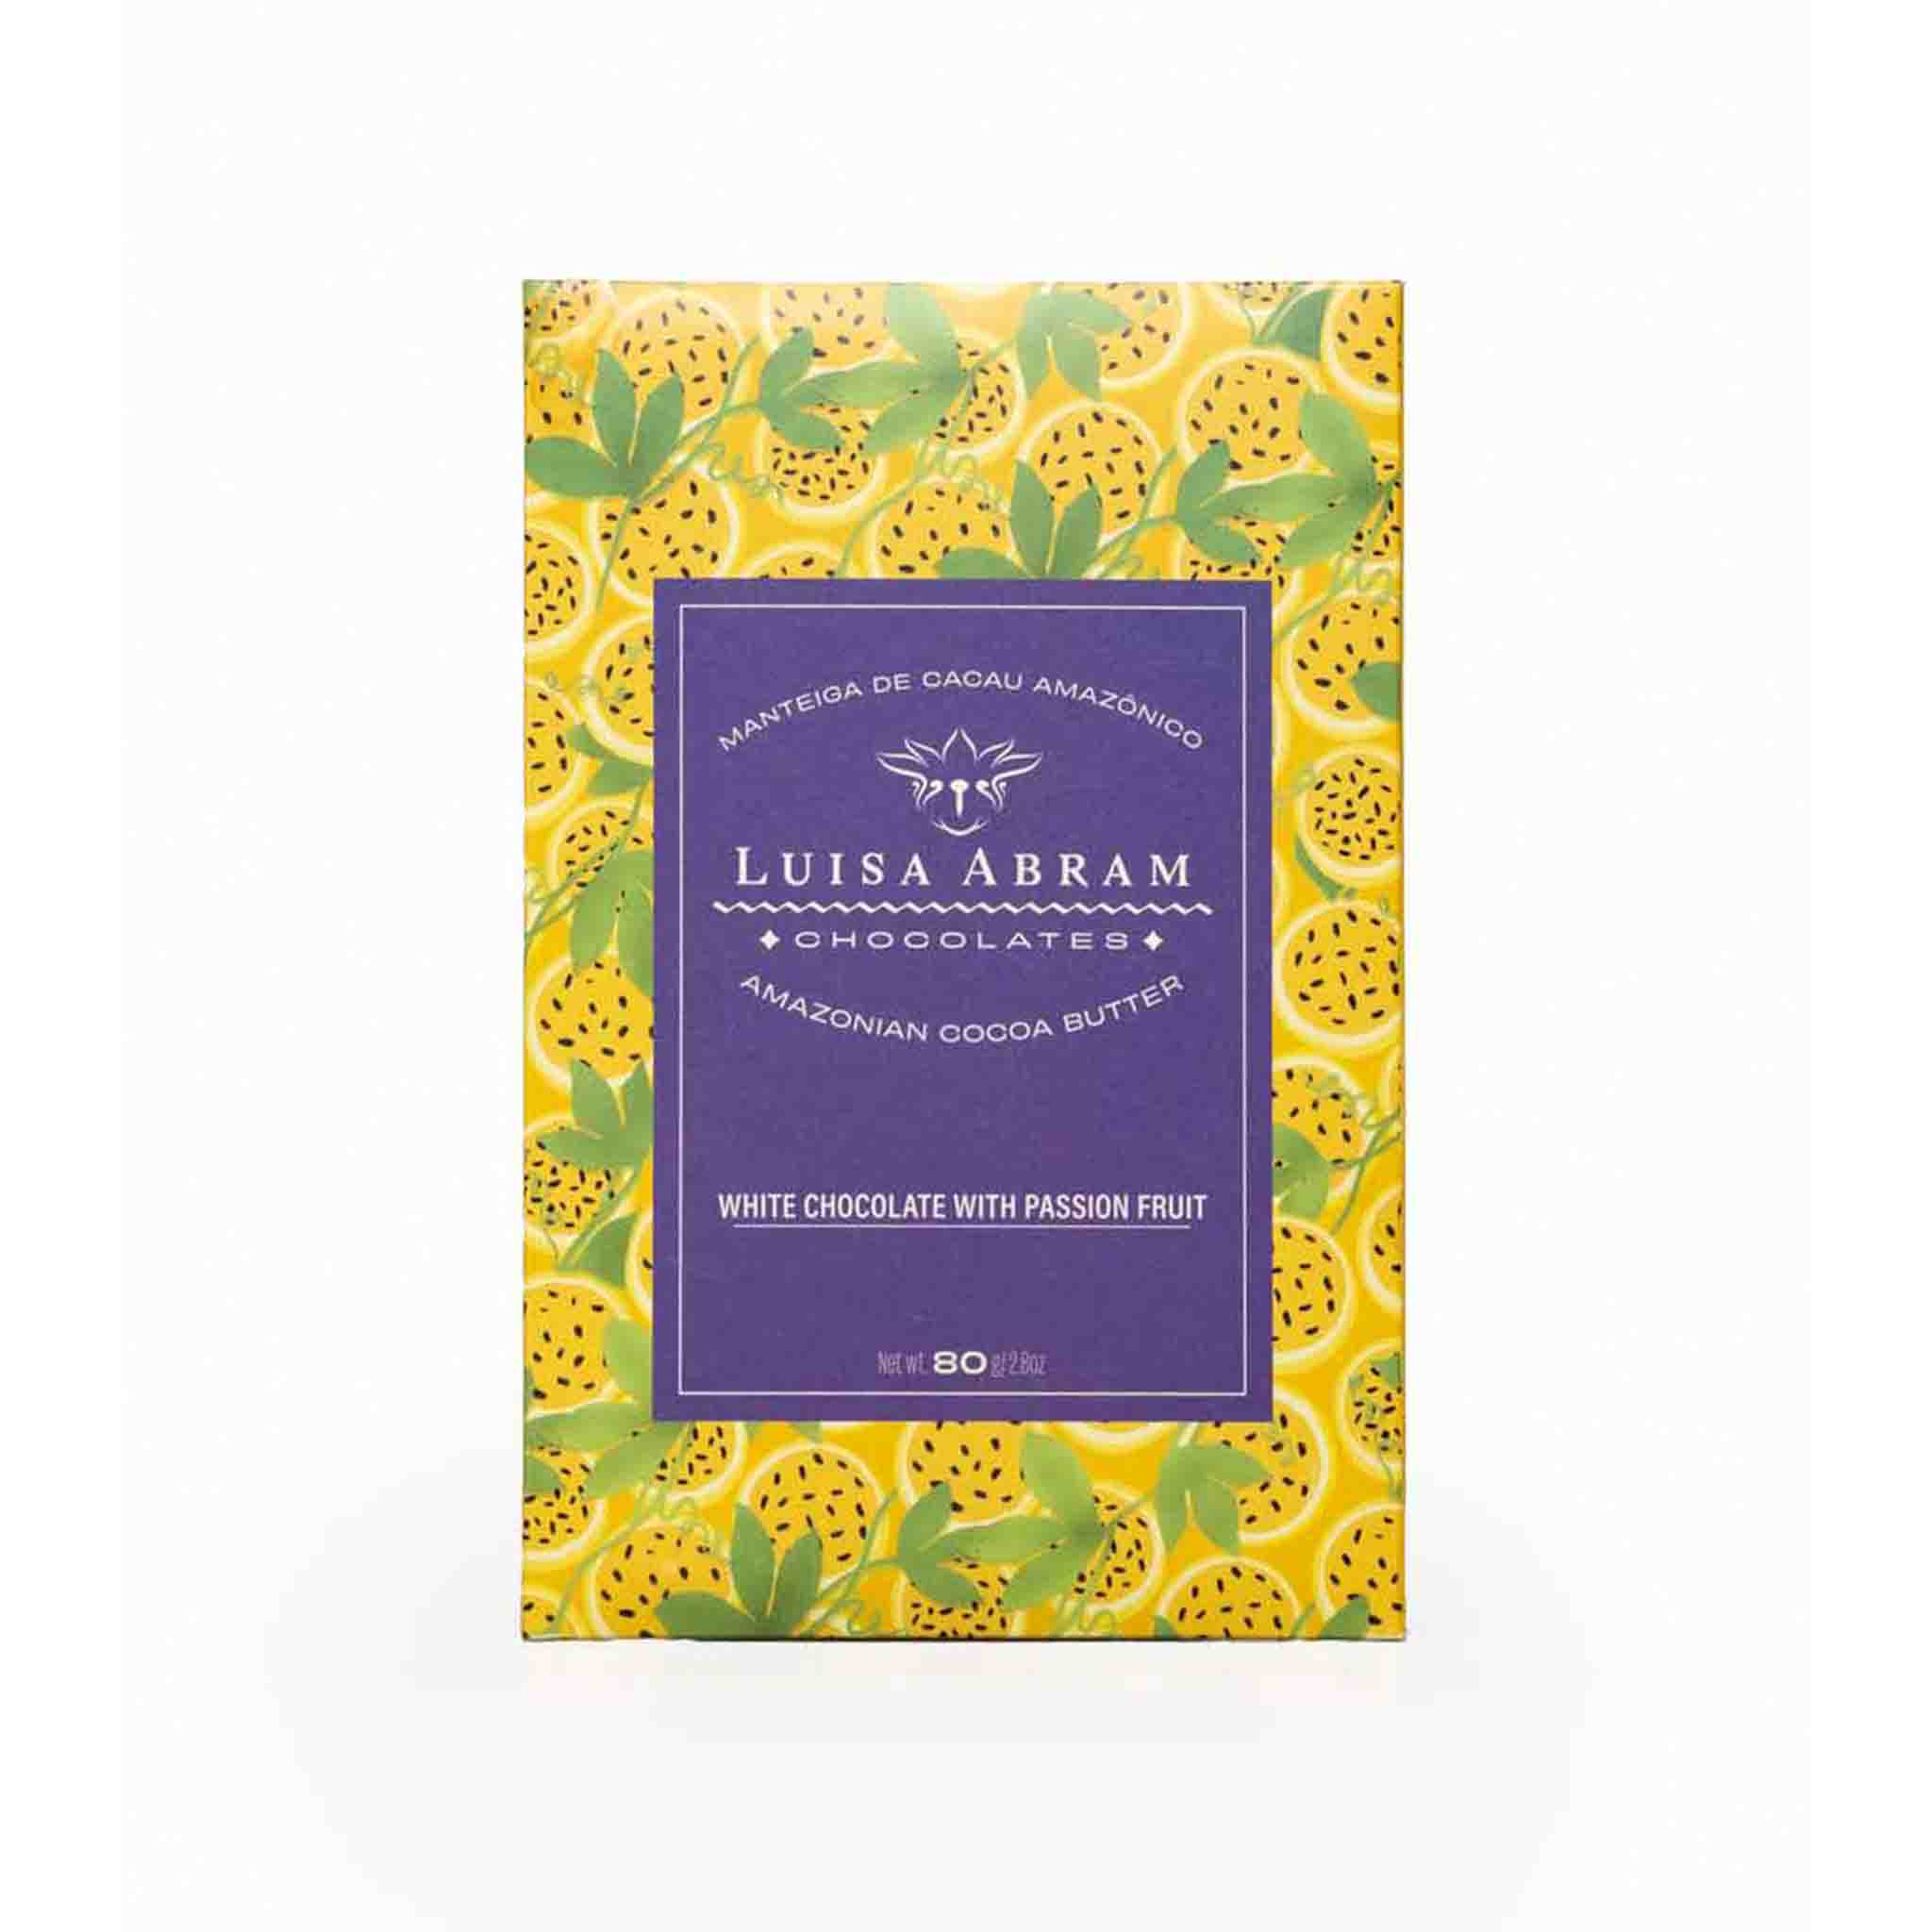 LUISA ABRAMS WHITE CHOCOLATE WITH PASSION FRUIT 80g